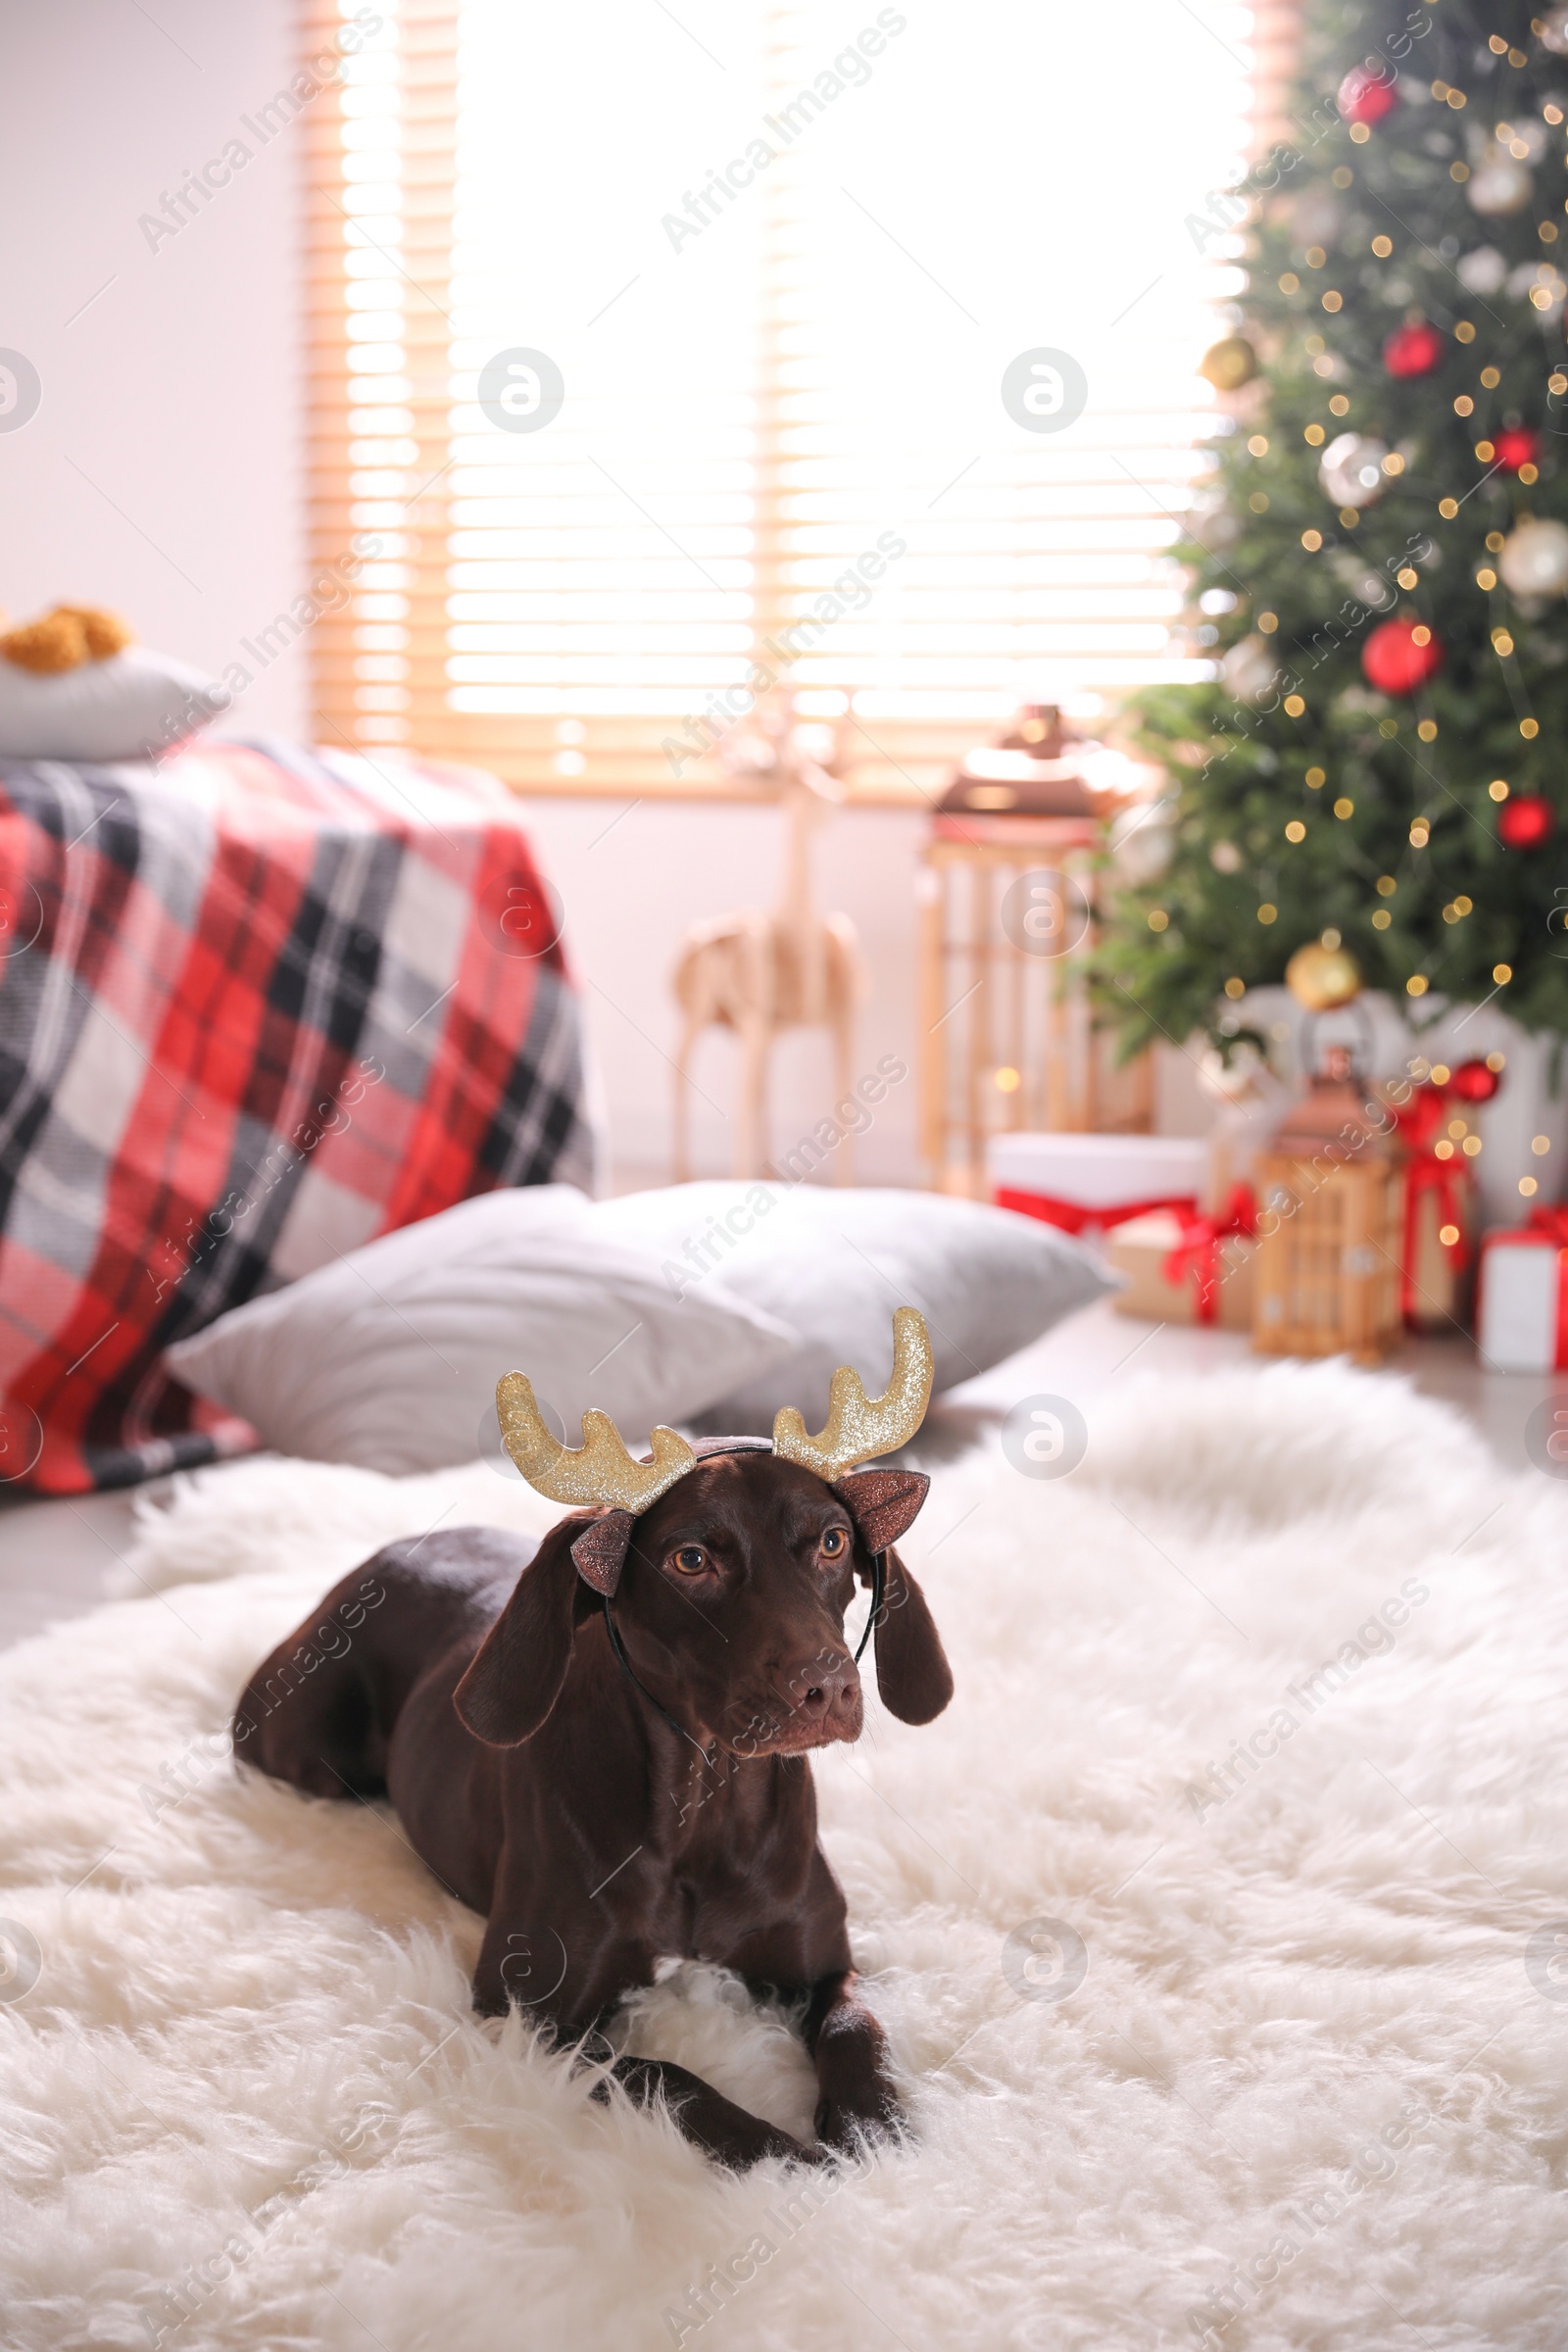 Photo of Cute dog wearing reindeer headband in room decorated for Christmas